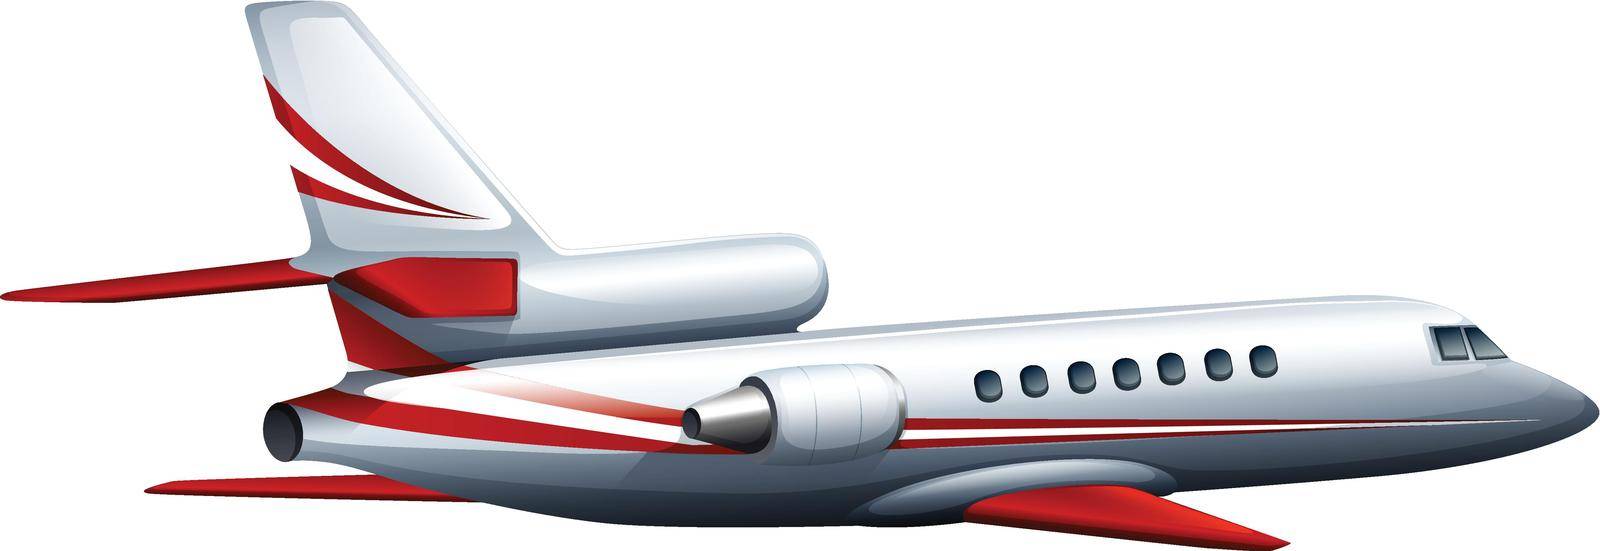 Illustration of a close up airplane